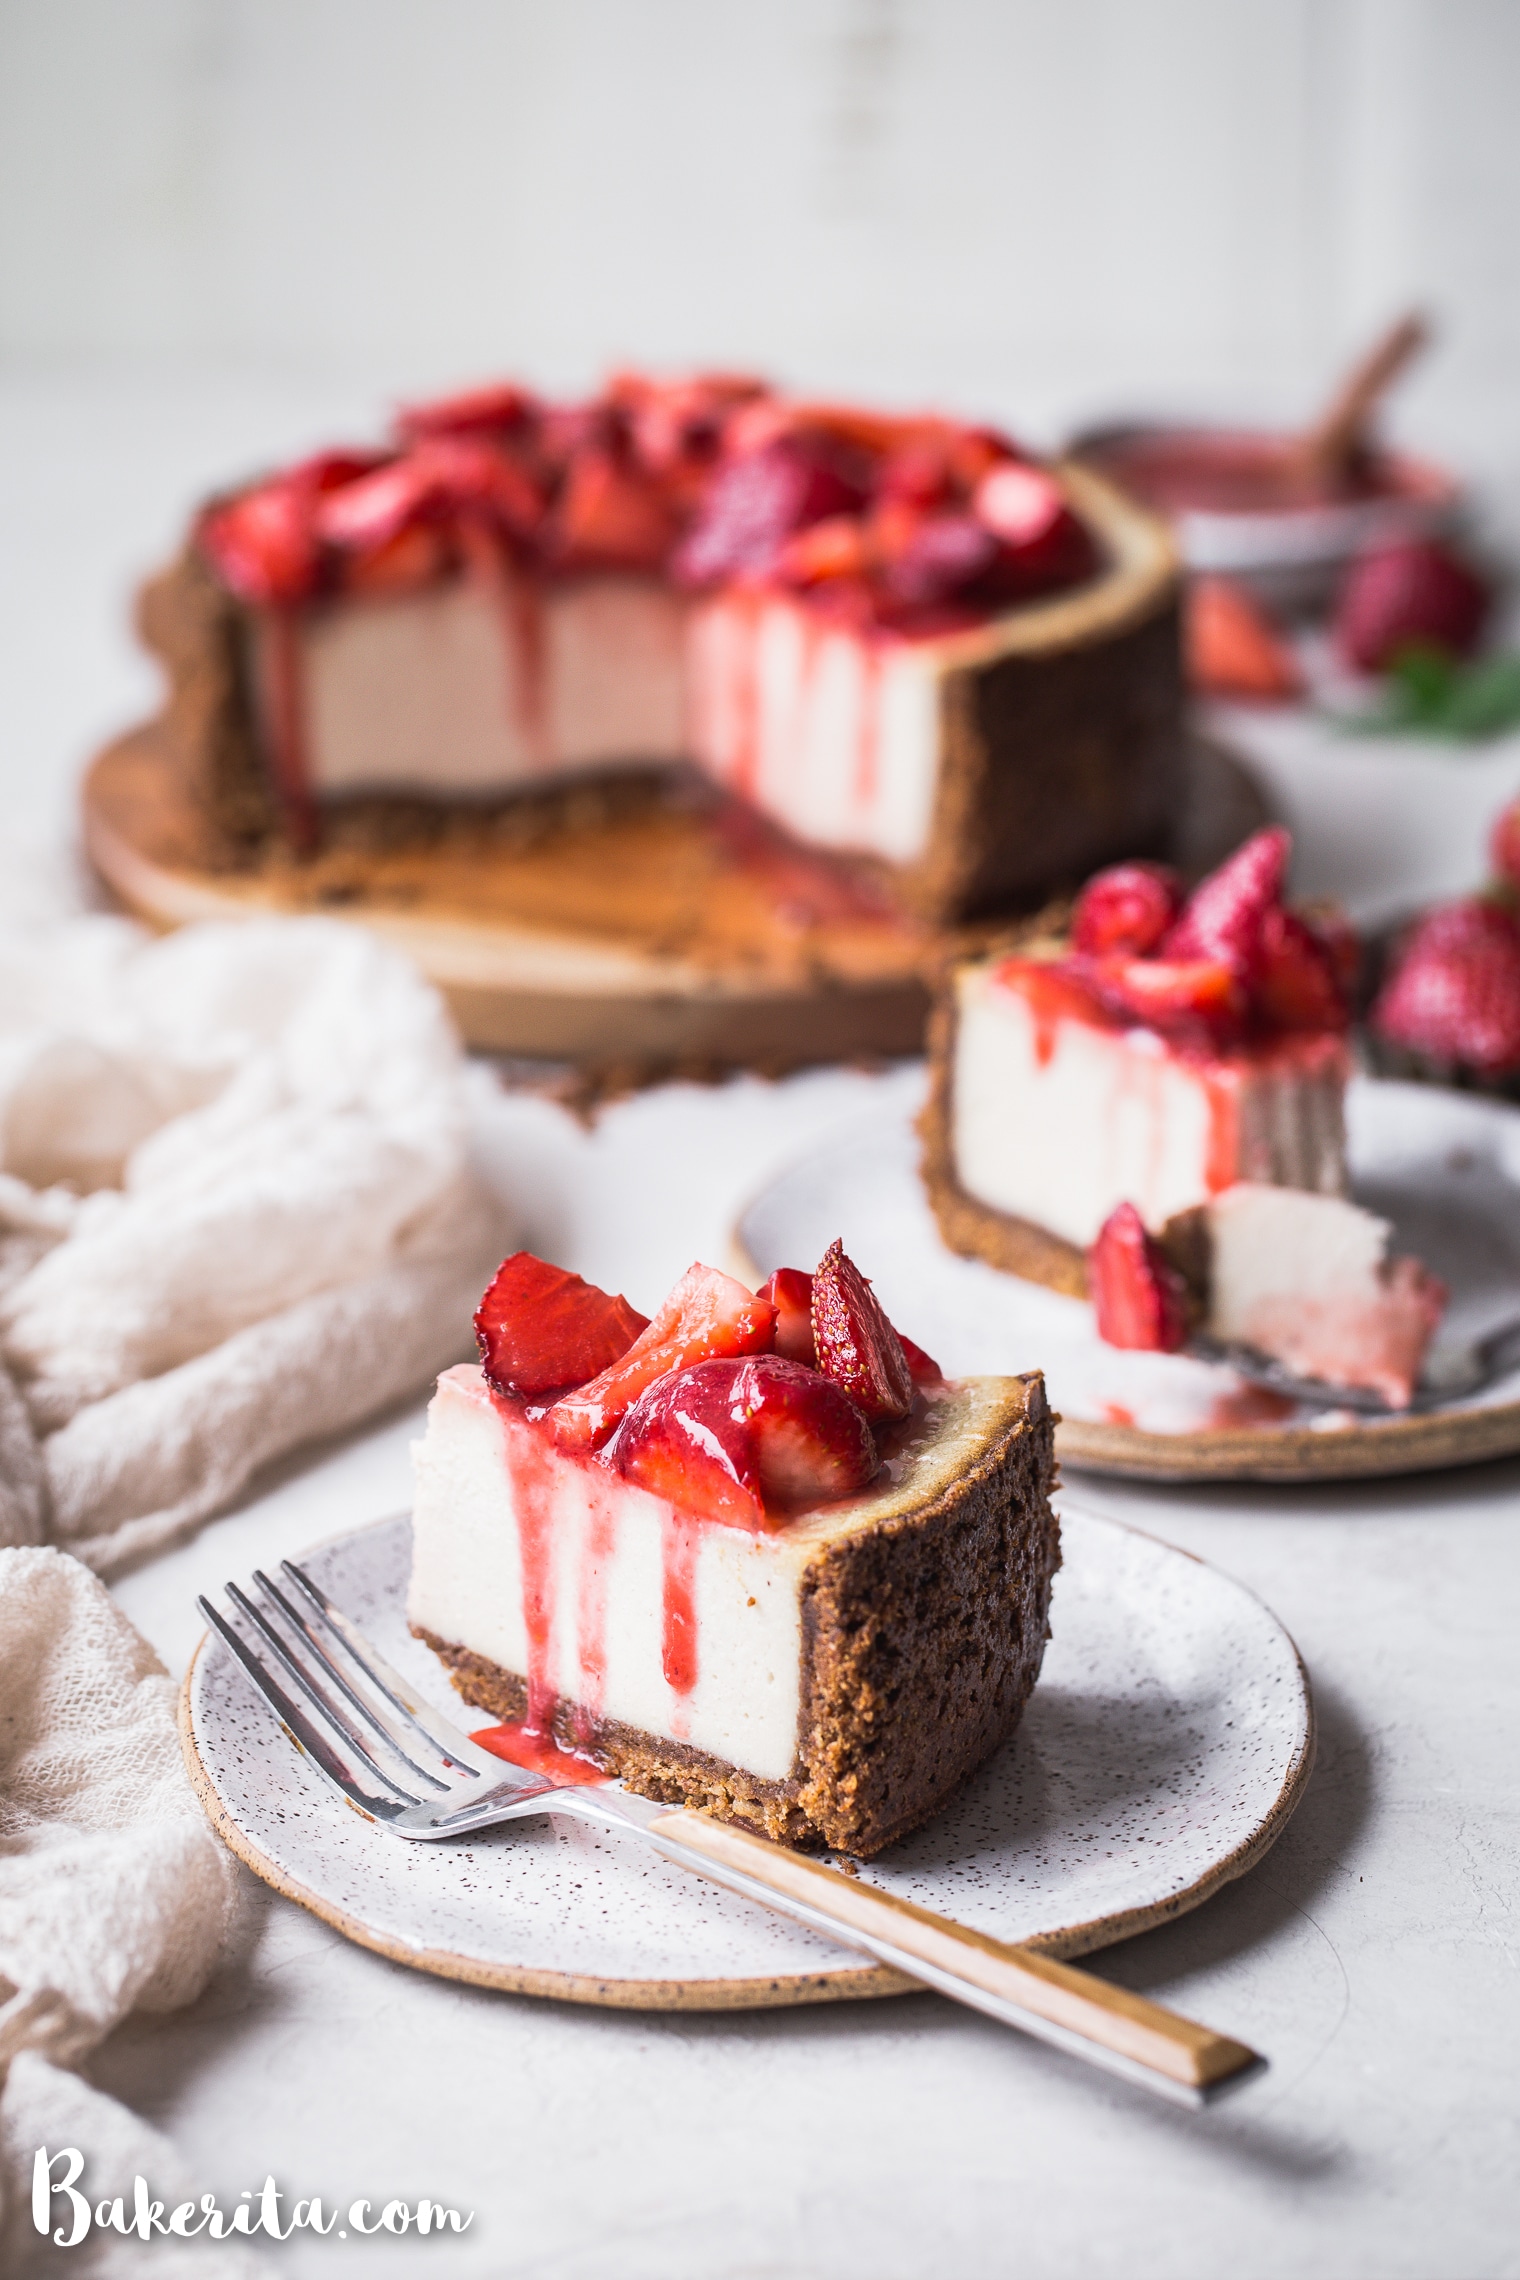 In this Baked Vegan Cheesecake, a gluten-free and paleo graham cracker-style crust encases a sweet and creamy vanilla cheesecake filling. Coconut yogurt and cashews create the perfect texture to mimic a classic cheesecake.